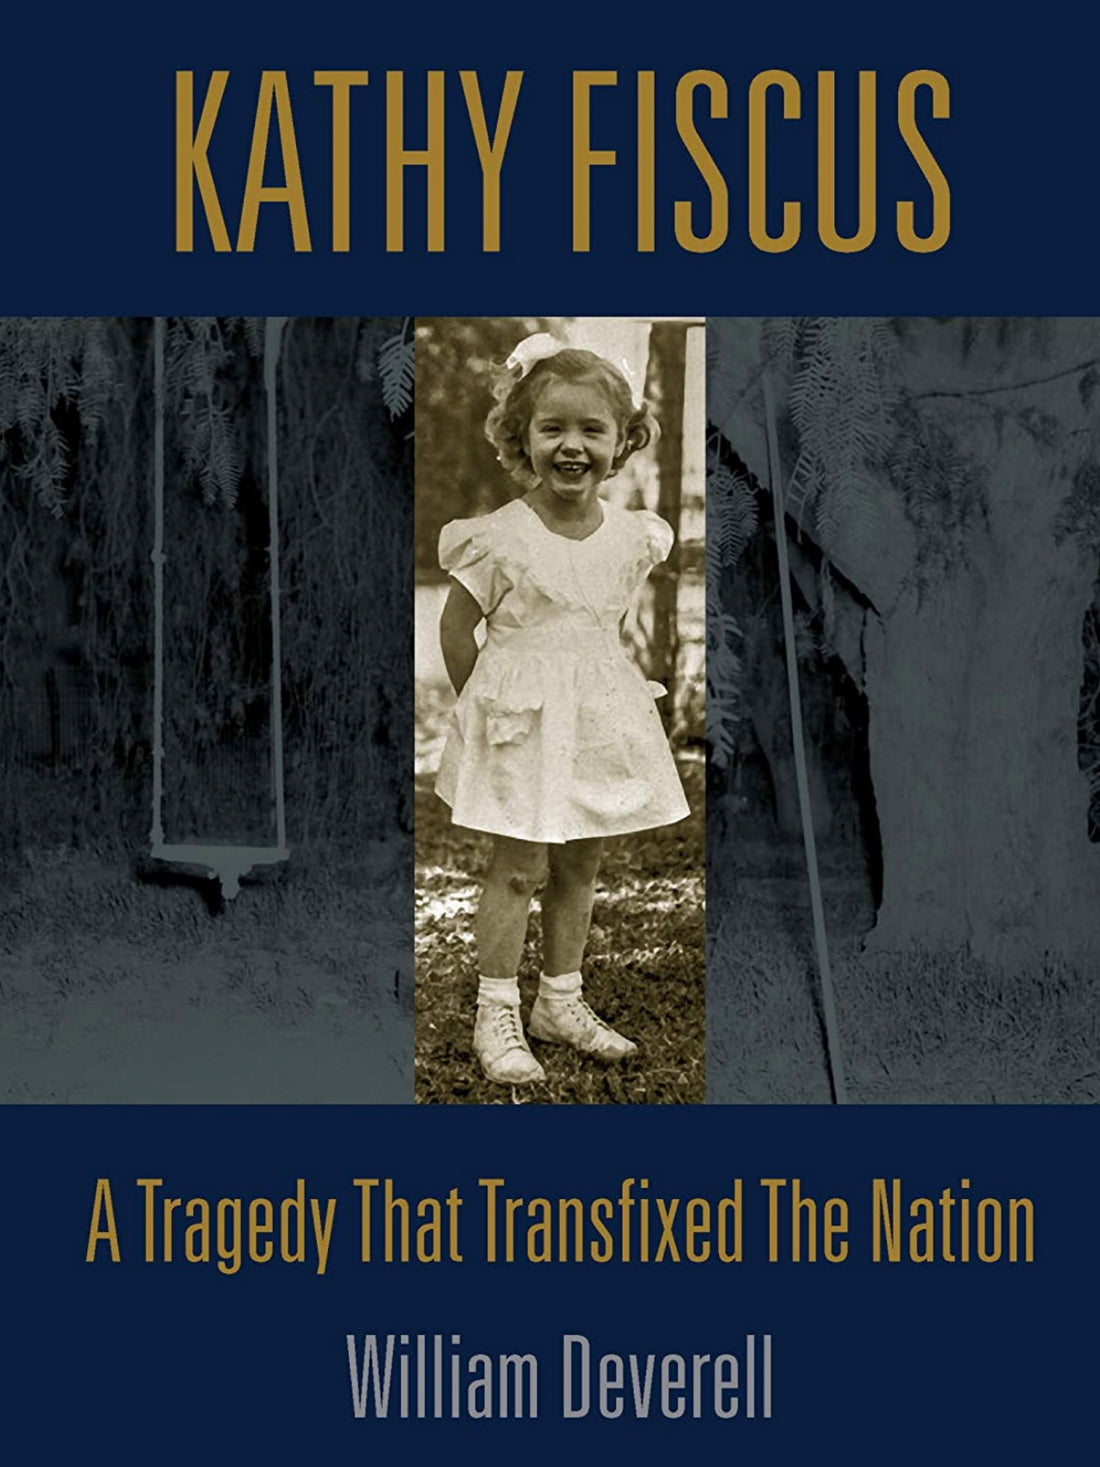 Book Review - Kathy Fiscus: A Tragedy That Transfixed The Nation